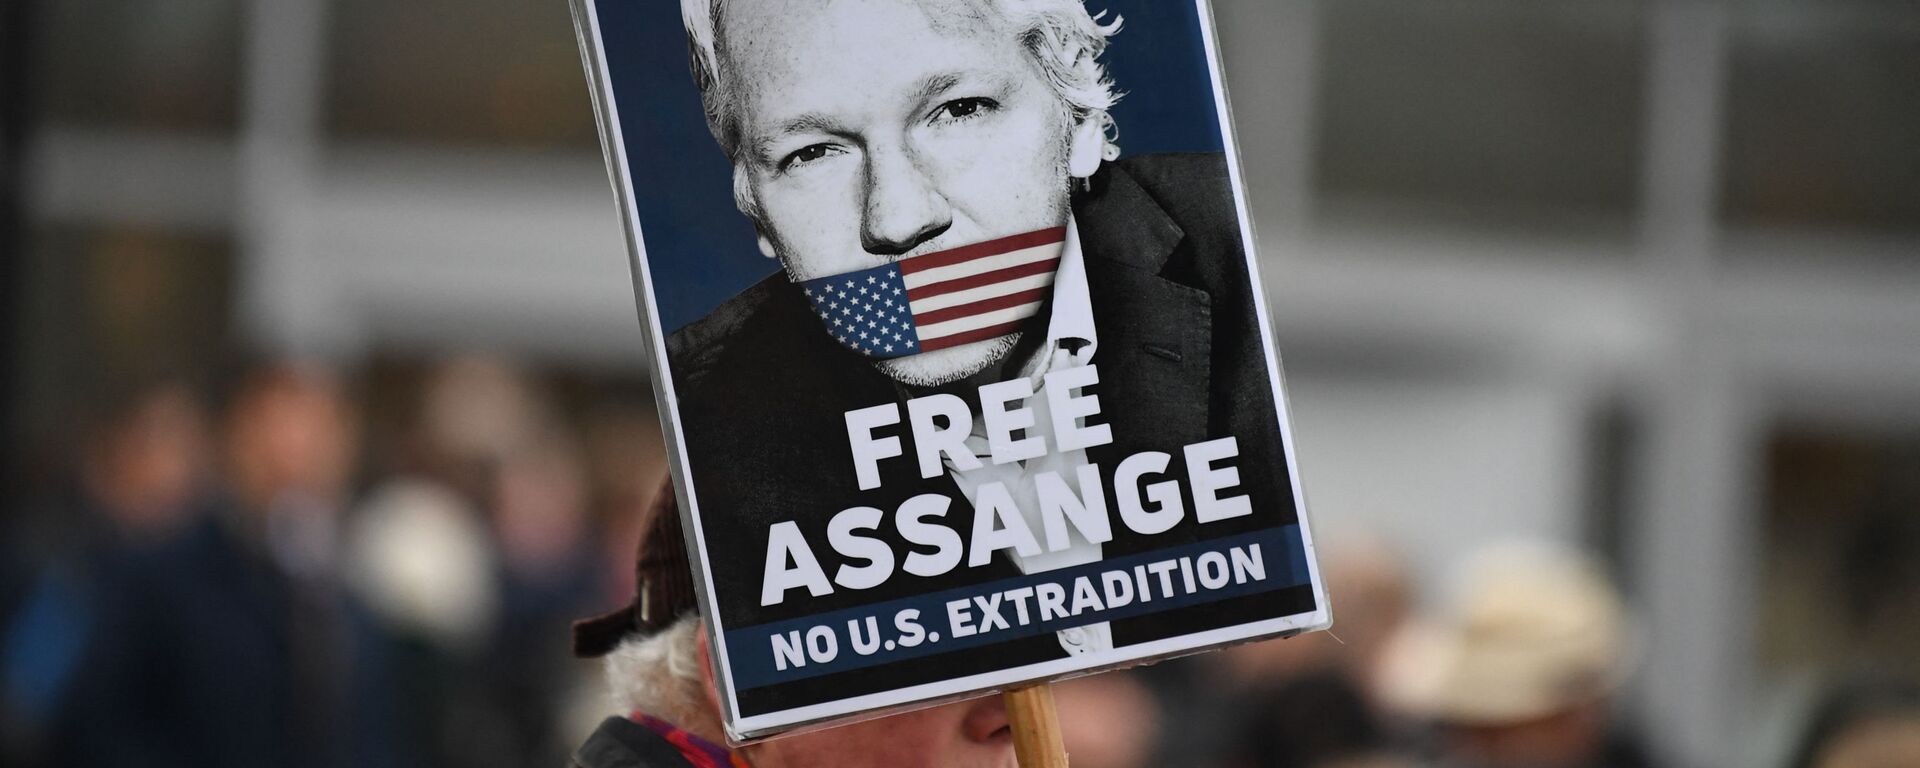 A supporter of WikiLeaks founder Julian Assange holds a placard calling for his freedom outside Woolwich Crown Court and HMP Belmarsh prison in southeast London on February 24, 2020, ahead of the opening of the trial to hear a US request for Assange's extradition - Sputnik International, 1920, 06.06.2021